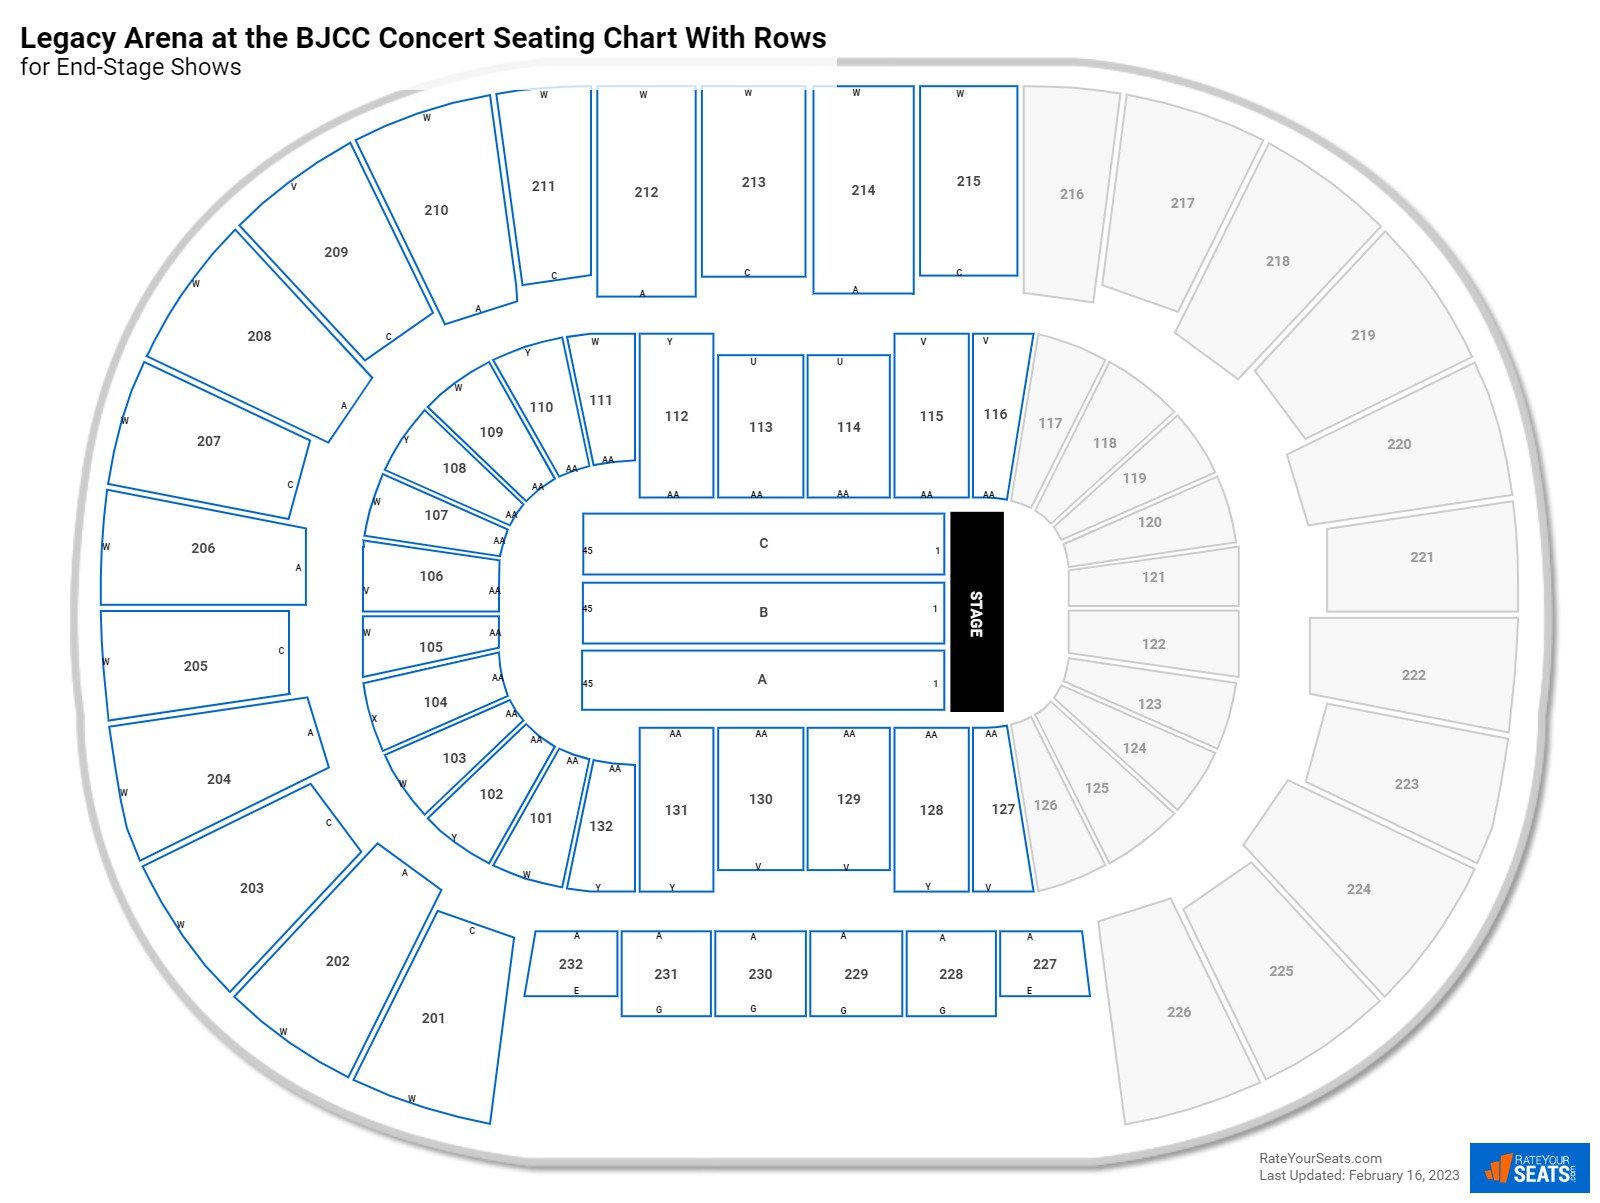 Legacy Arena at the BJCC seating chart with row numbers